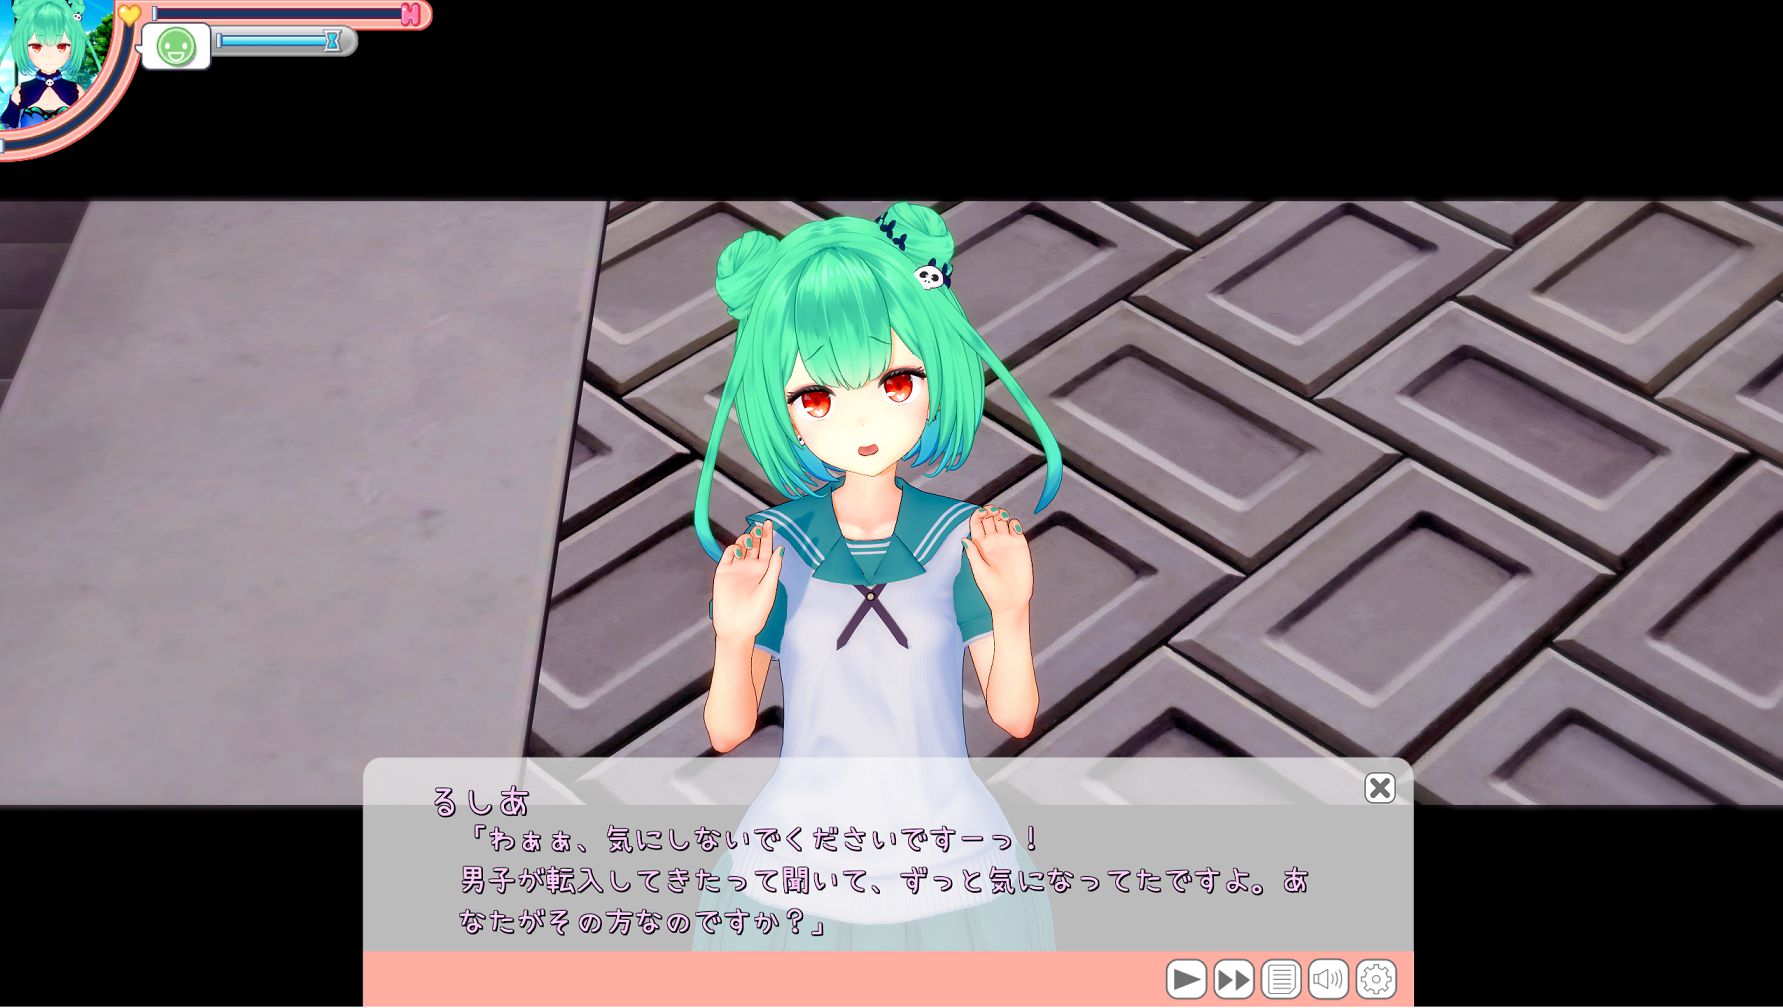 【Good news】Eroge "Koikatsu", too much fun to etch with characters of famous anime games wwwwwww 11